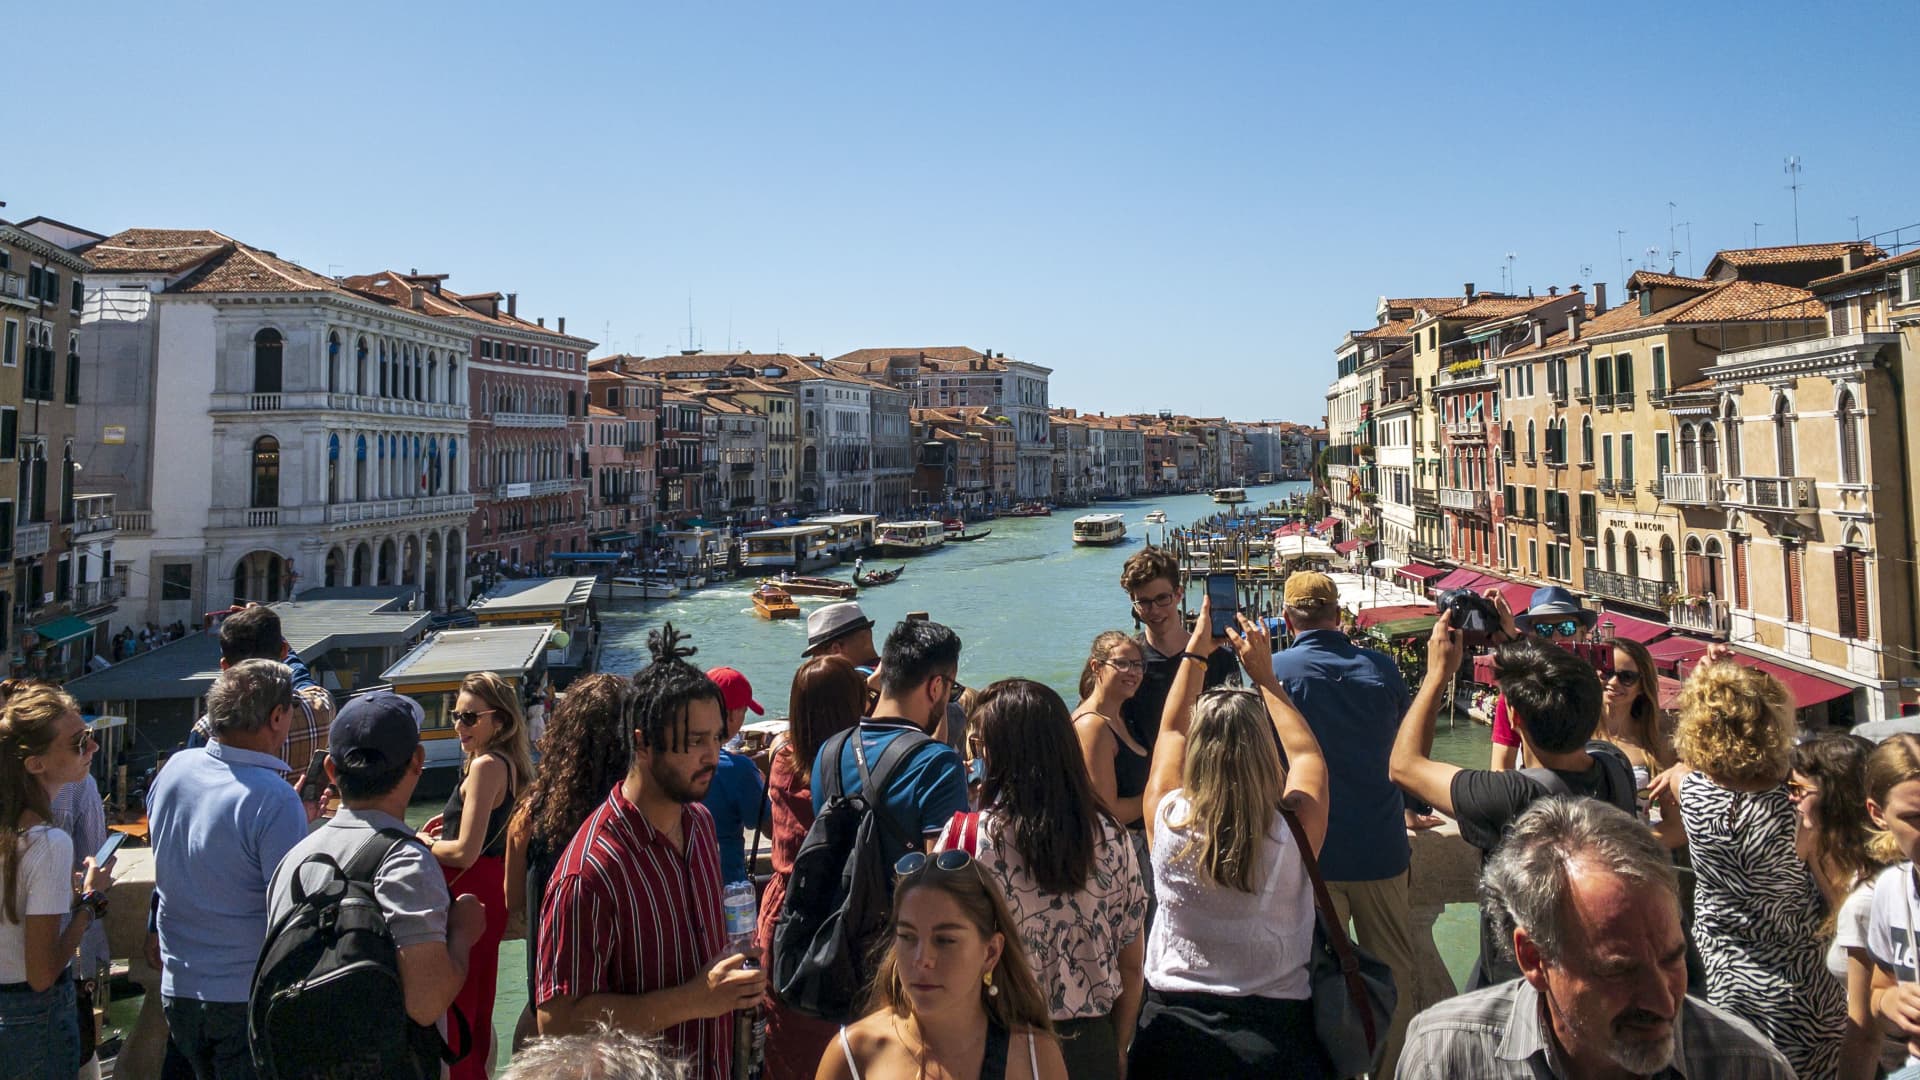 Years in the making, Venice approves a tax on daytrippers